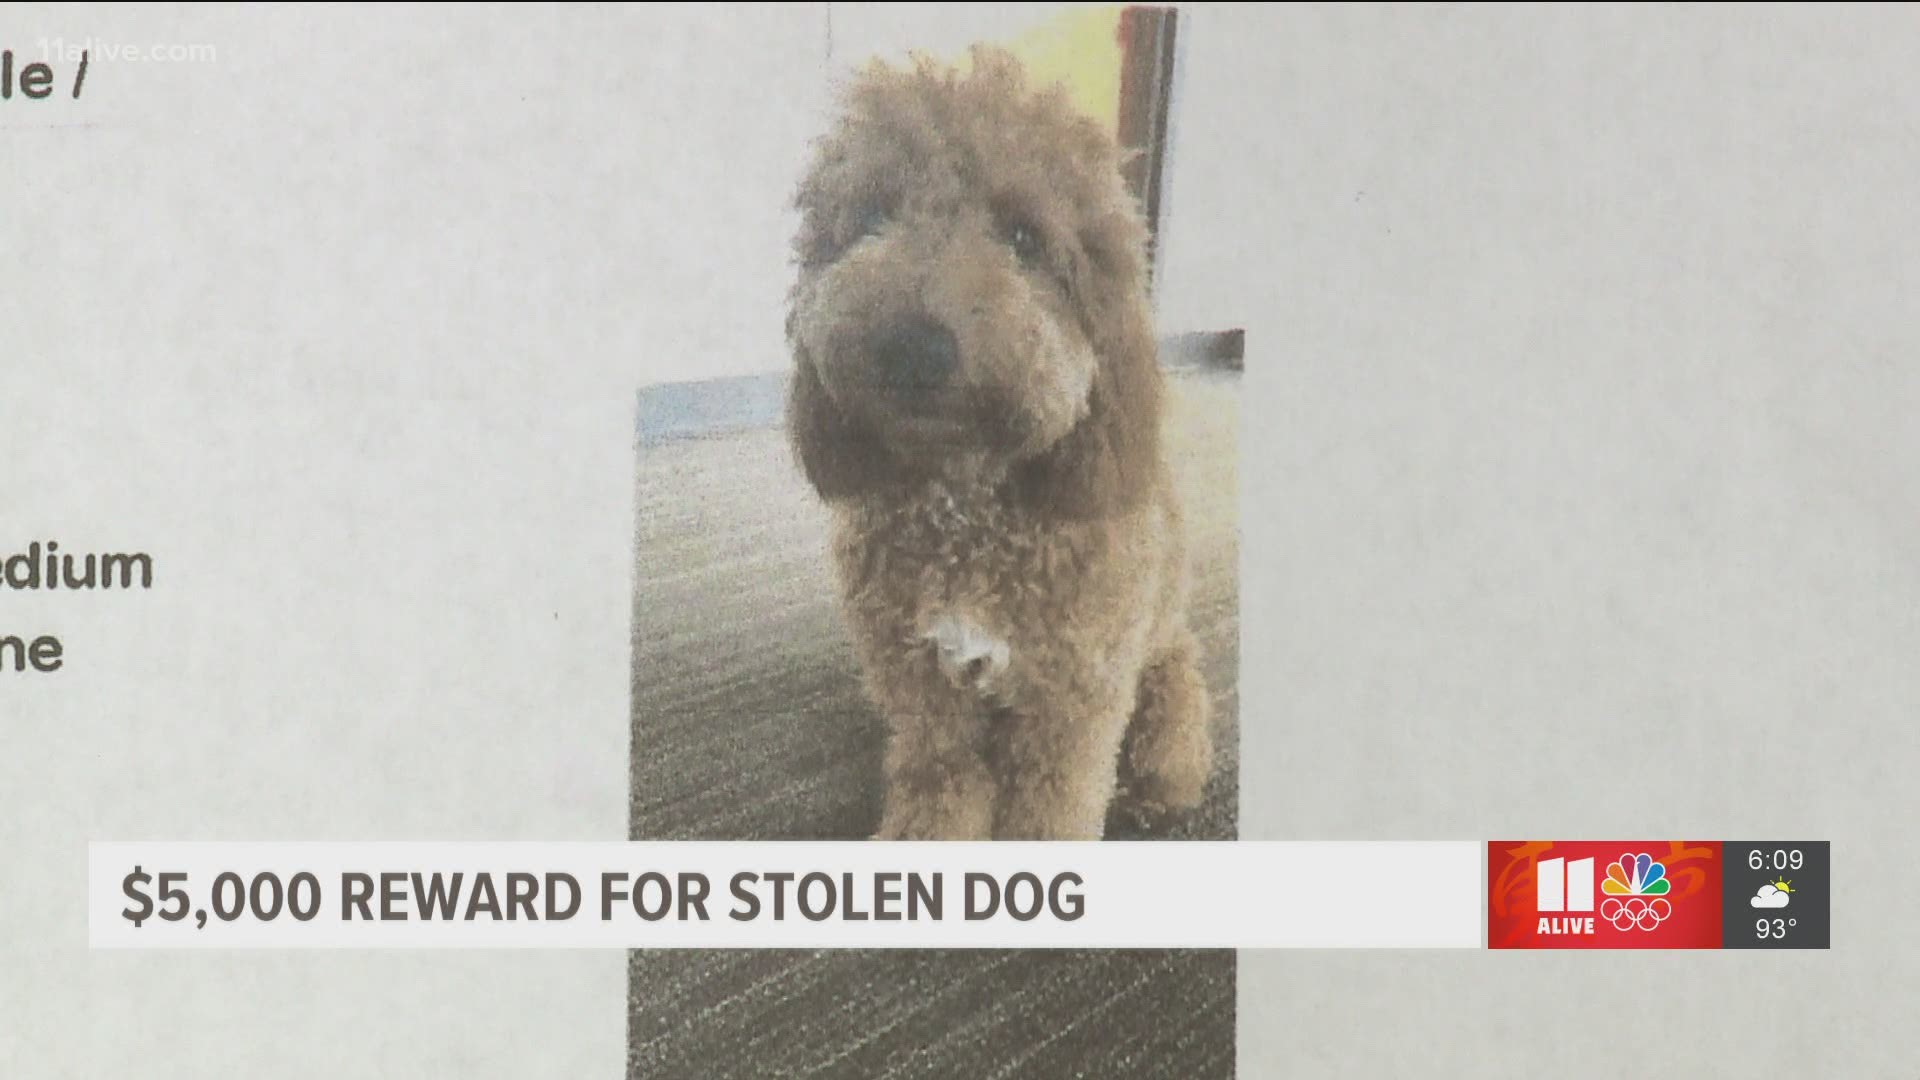 He told police that he left the vehicle running for a short time to provide air conditioning for the dog.